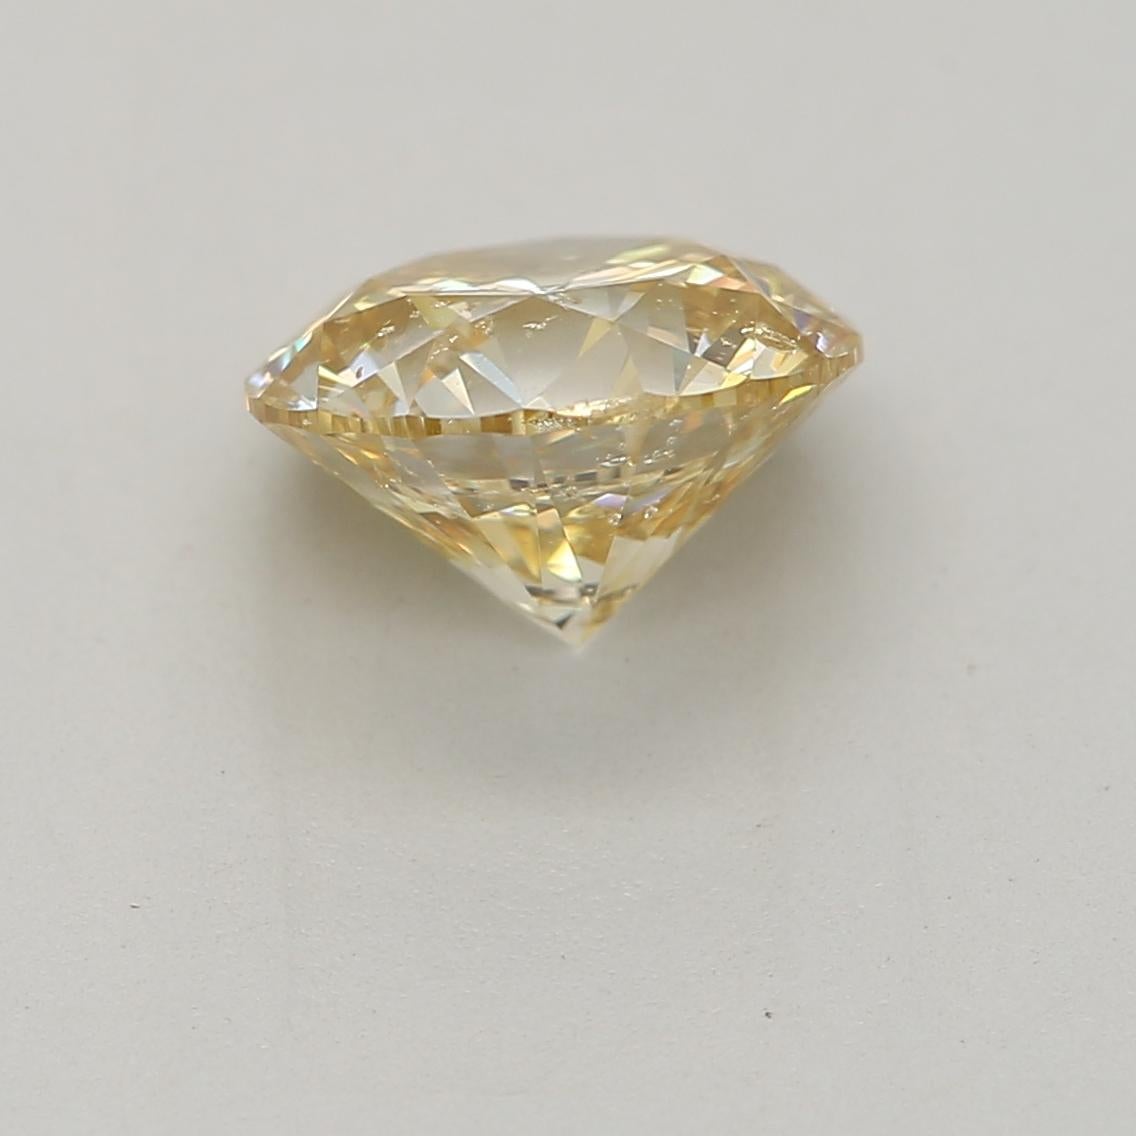 Round Cut 1.01-CARAT, FANCY BROWNISH YELLOW ROUND CUT DIAMOND I2 Clarity GIA Certified For Sale